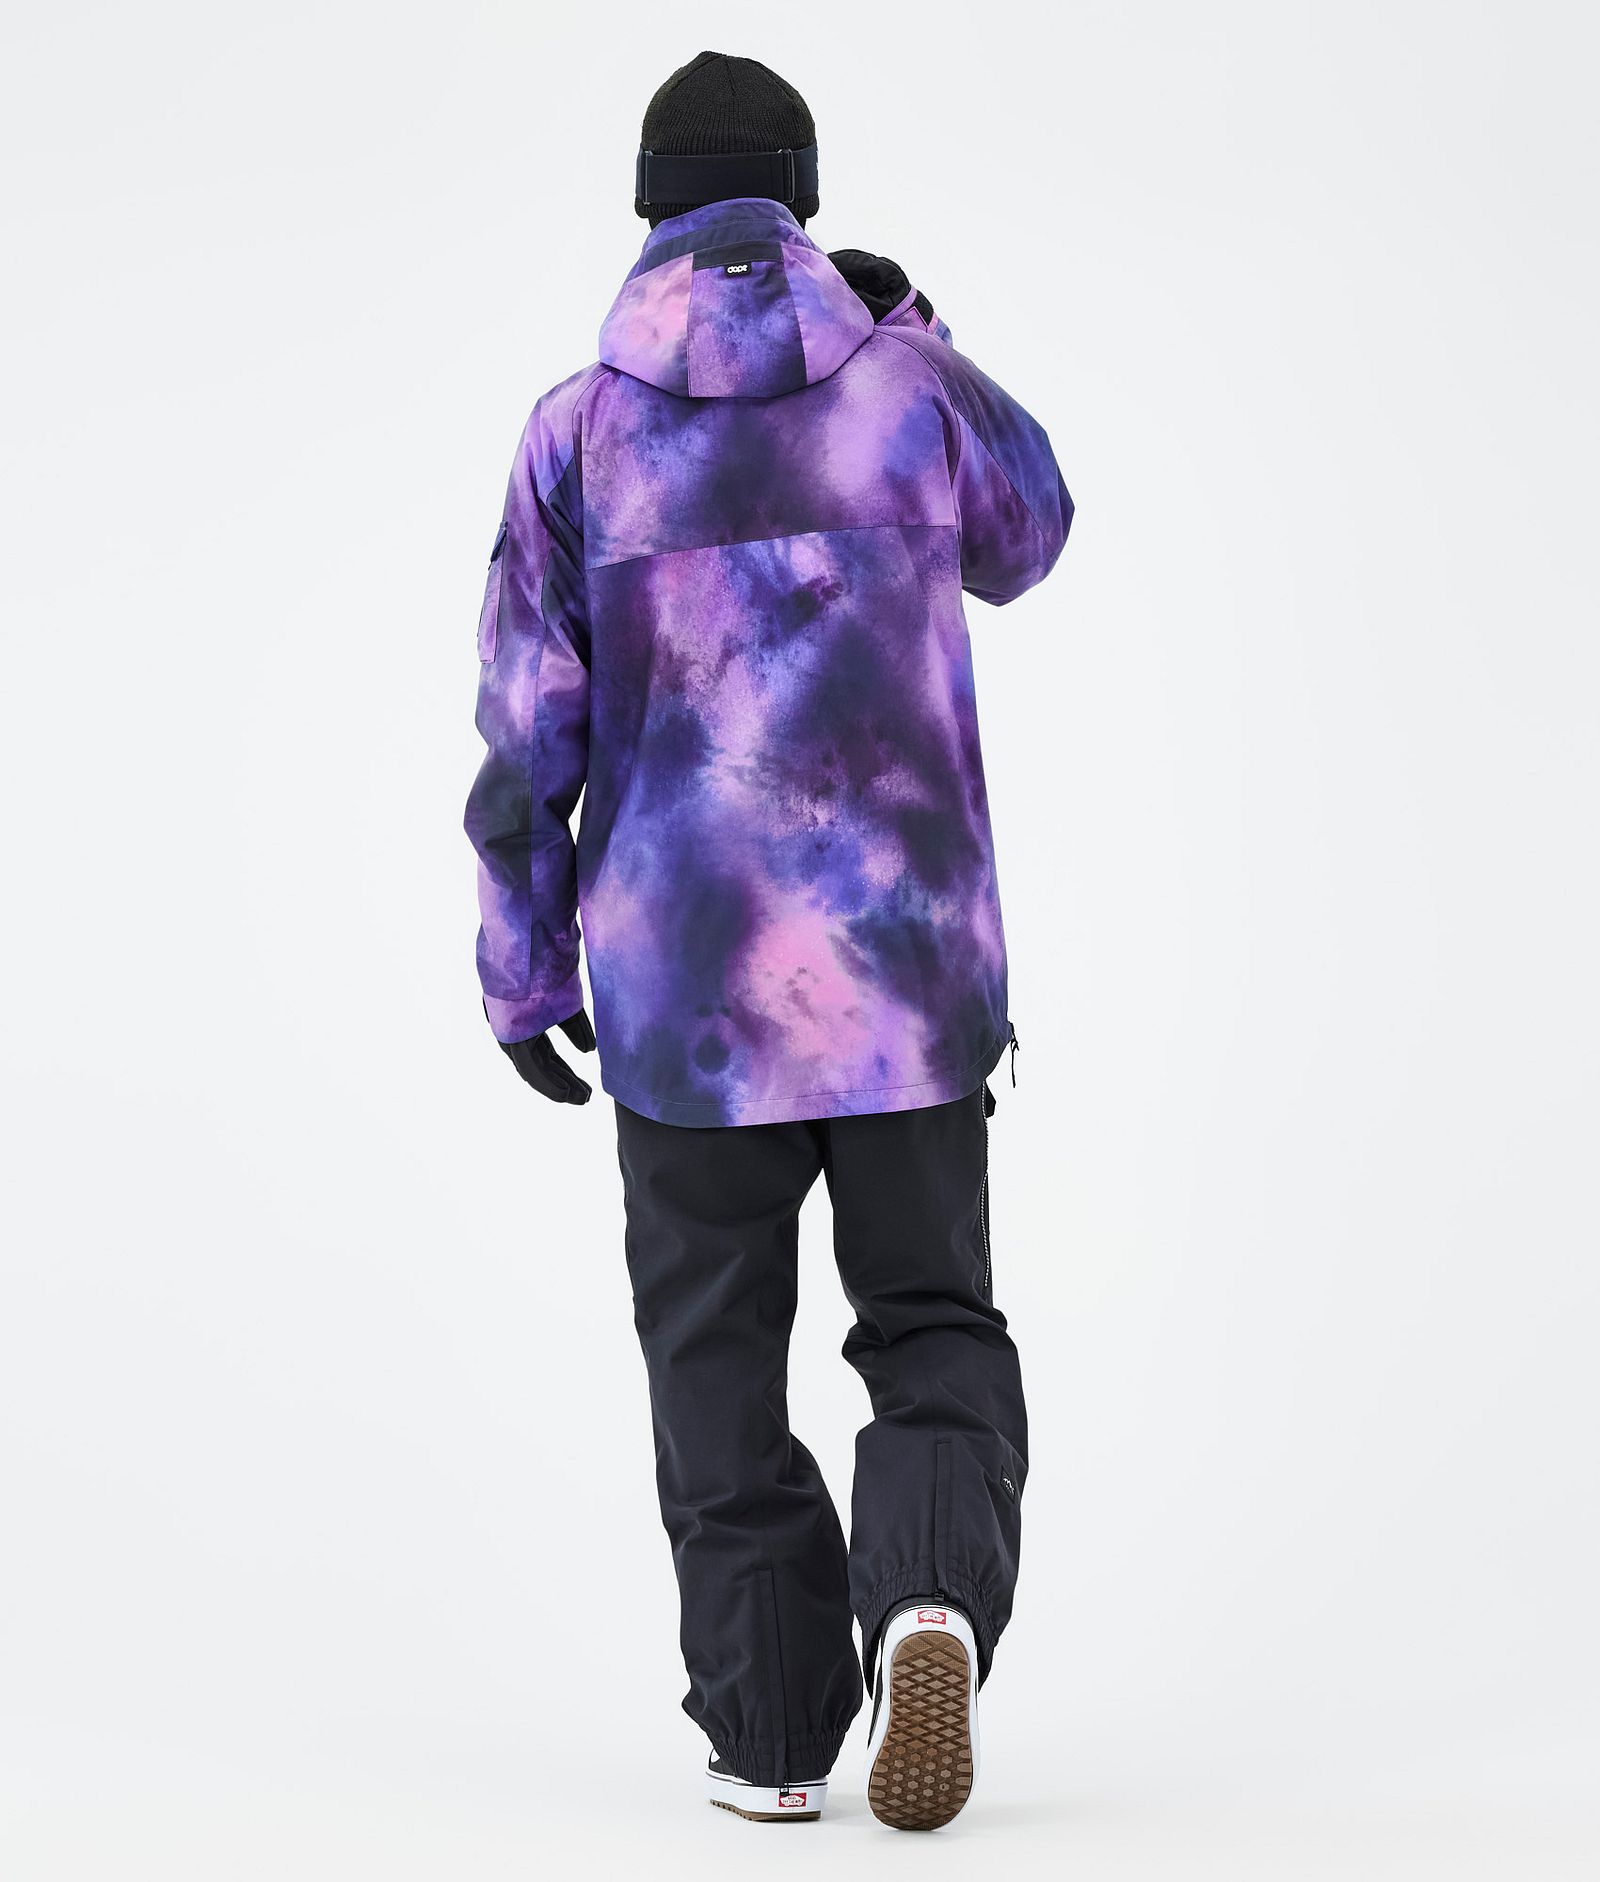 Akin Outfit Snowboard Homme Dusk/Black, Image 2 of 2